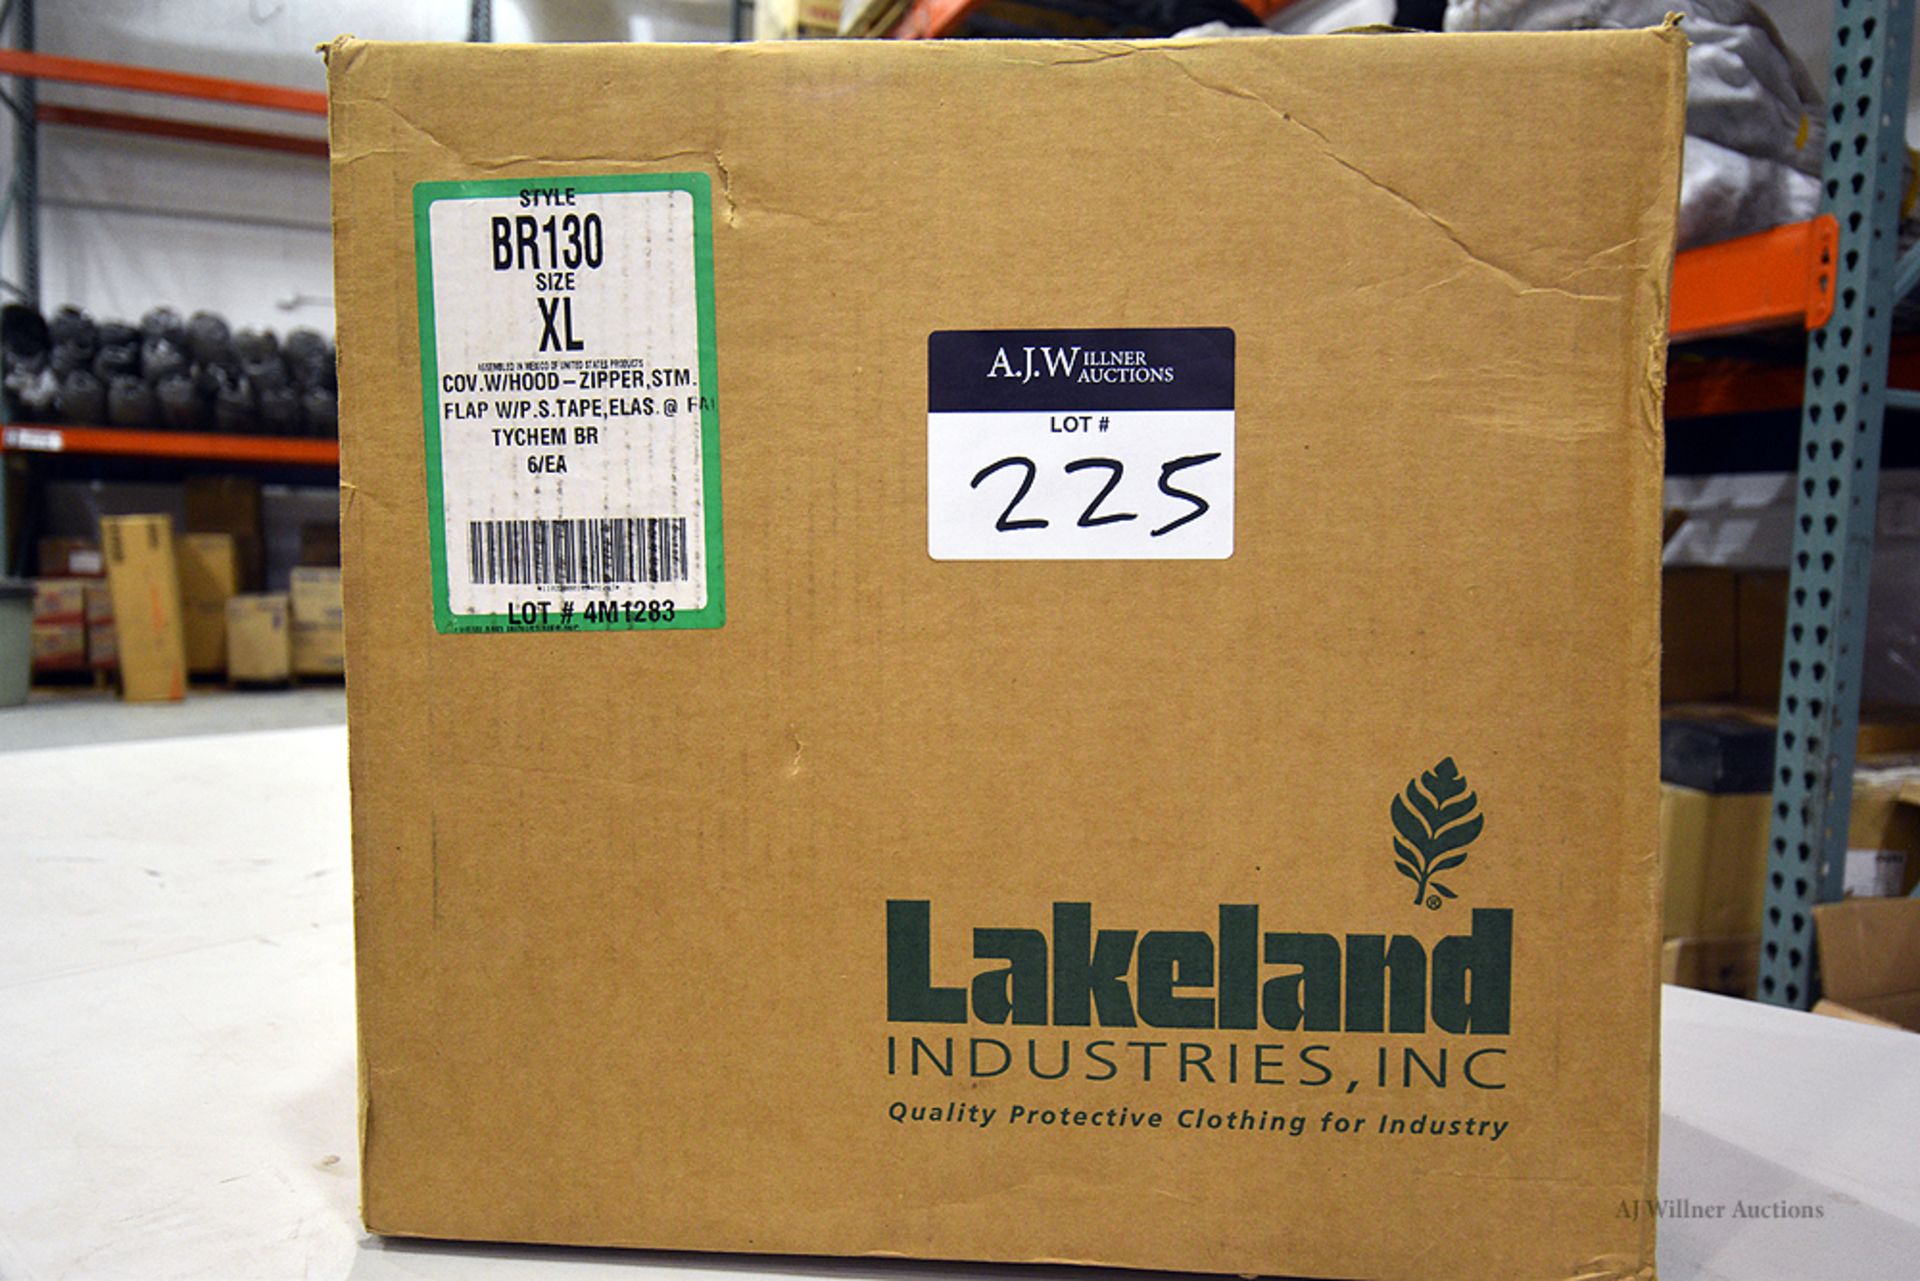 Boxes of 6pc - Lakeland BR130 Coverall/Hood, Zipper, STM,Flap w/P.S.Tape, Elas. Tychem BR